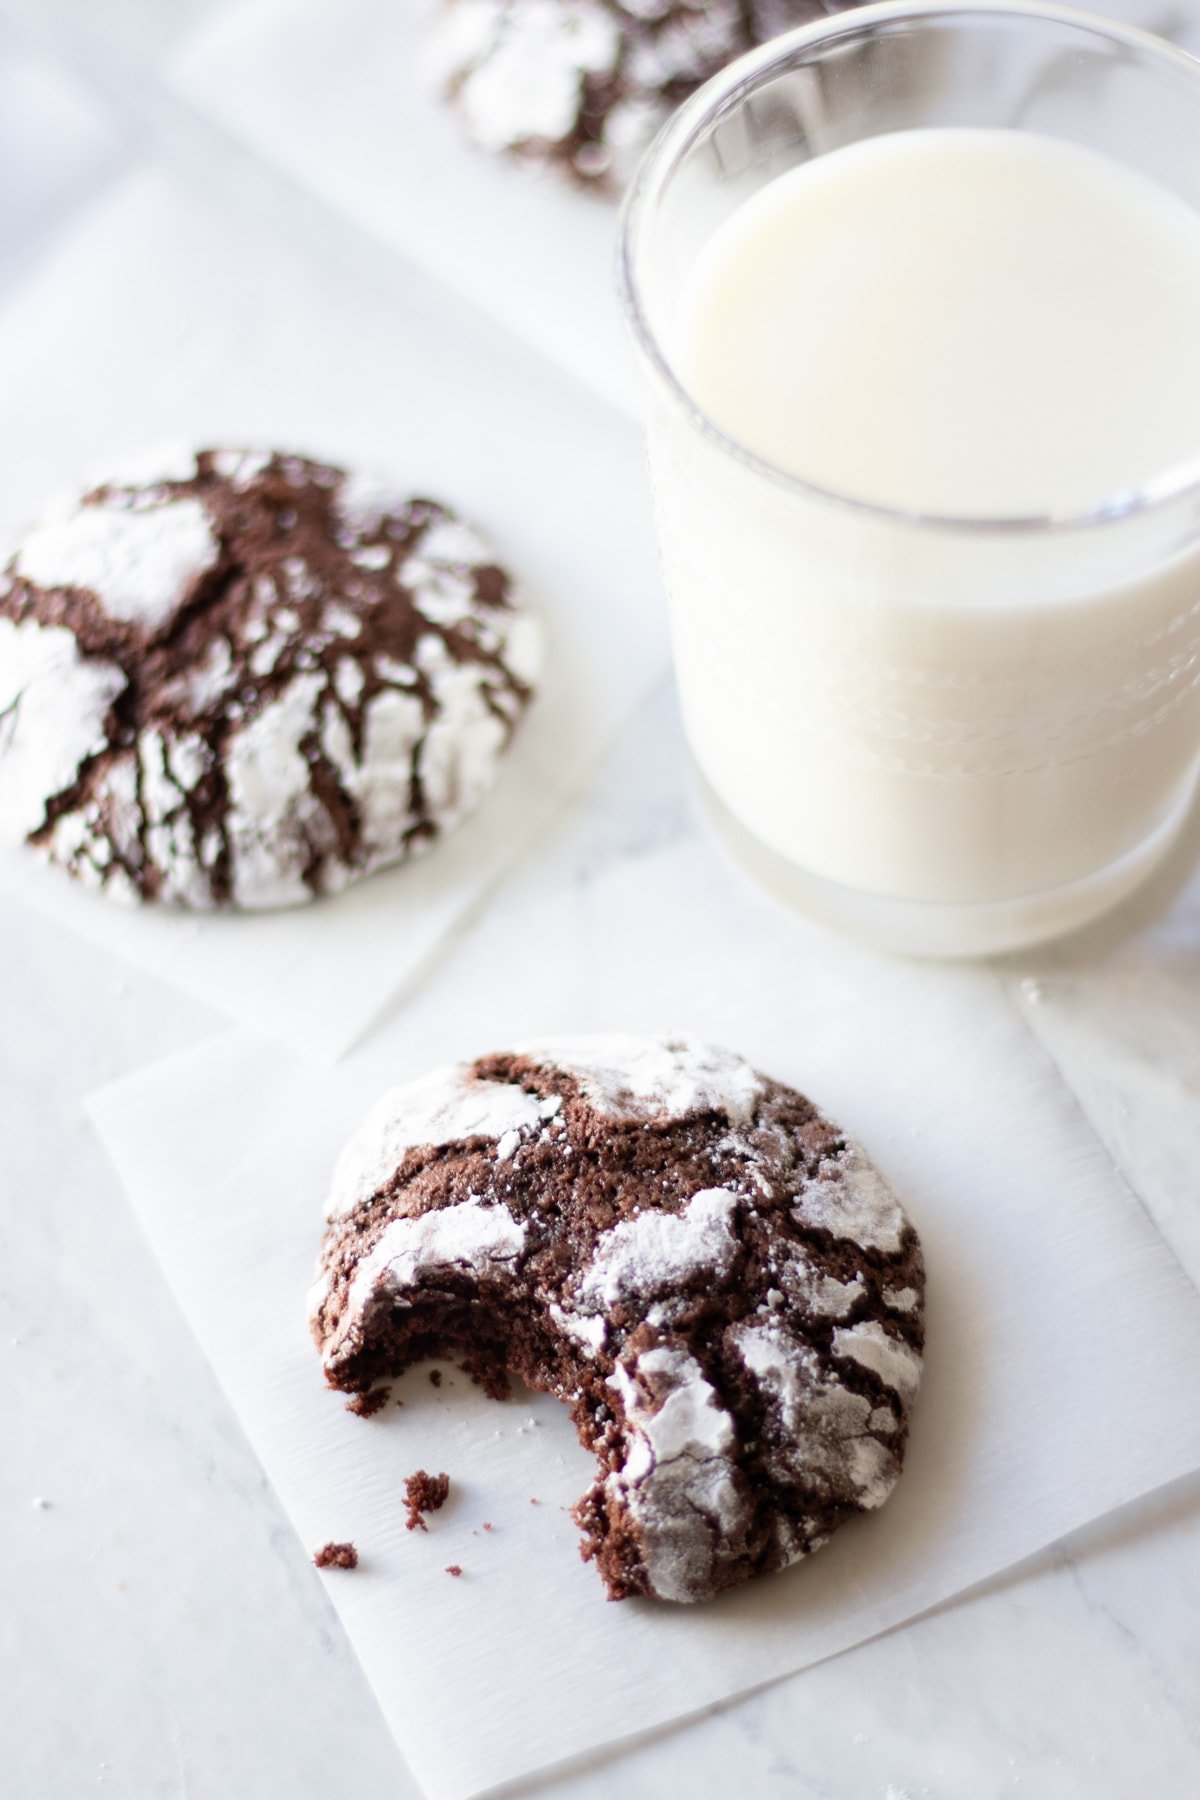 A cocoa crinkle cookie with a bite taken out sitting next to a glass of milk.